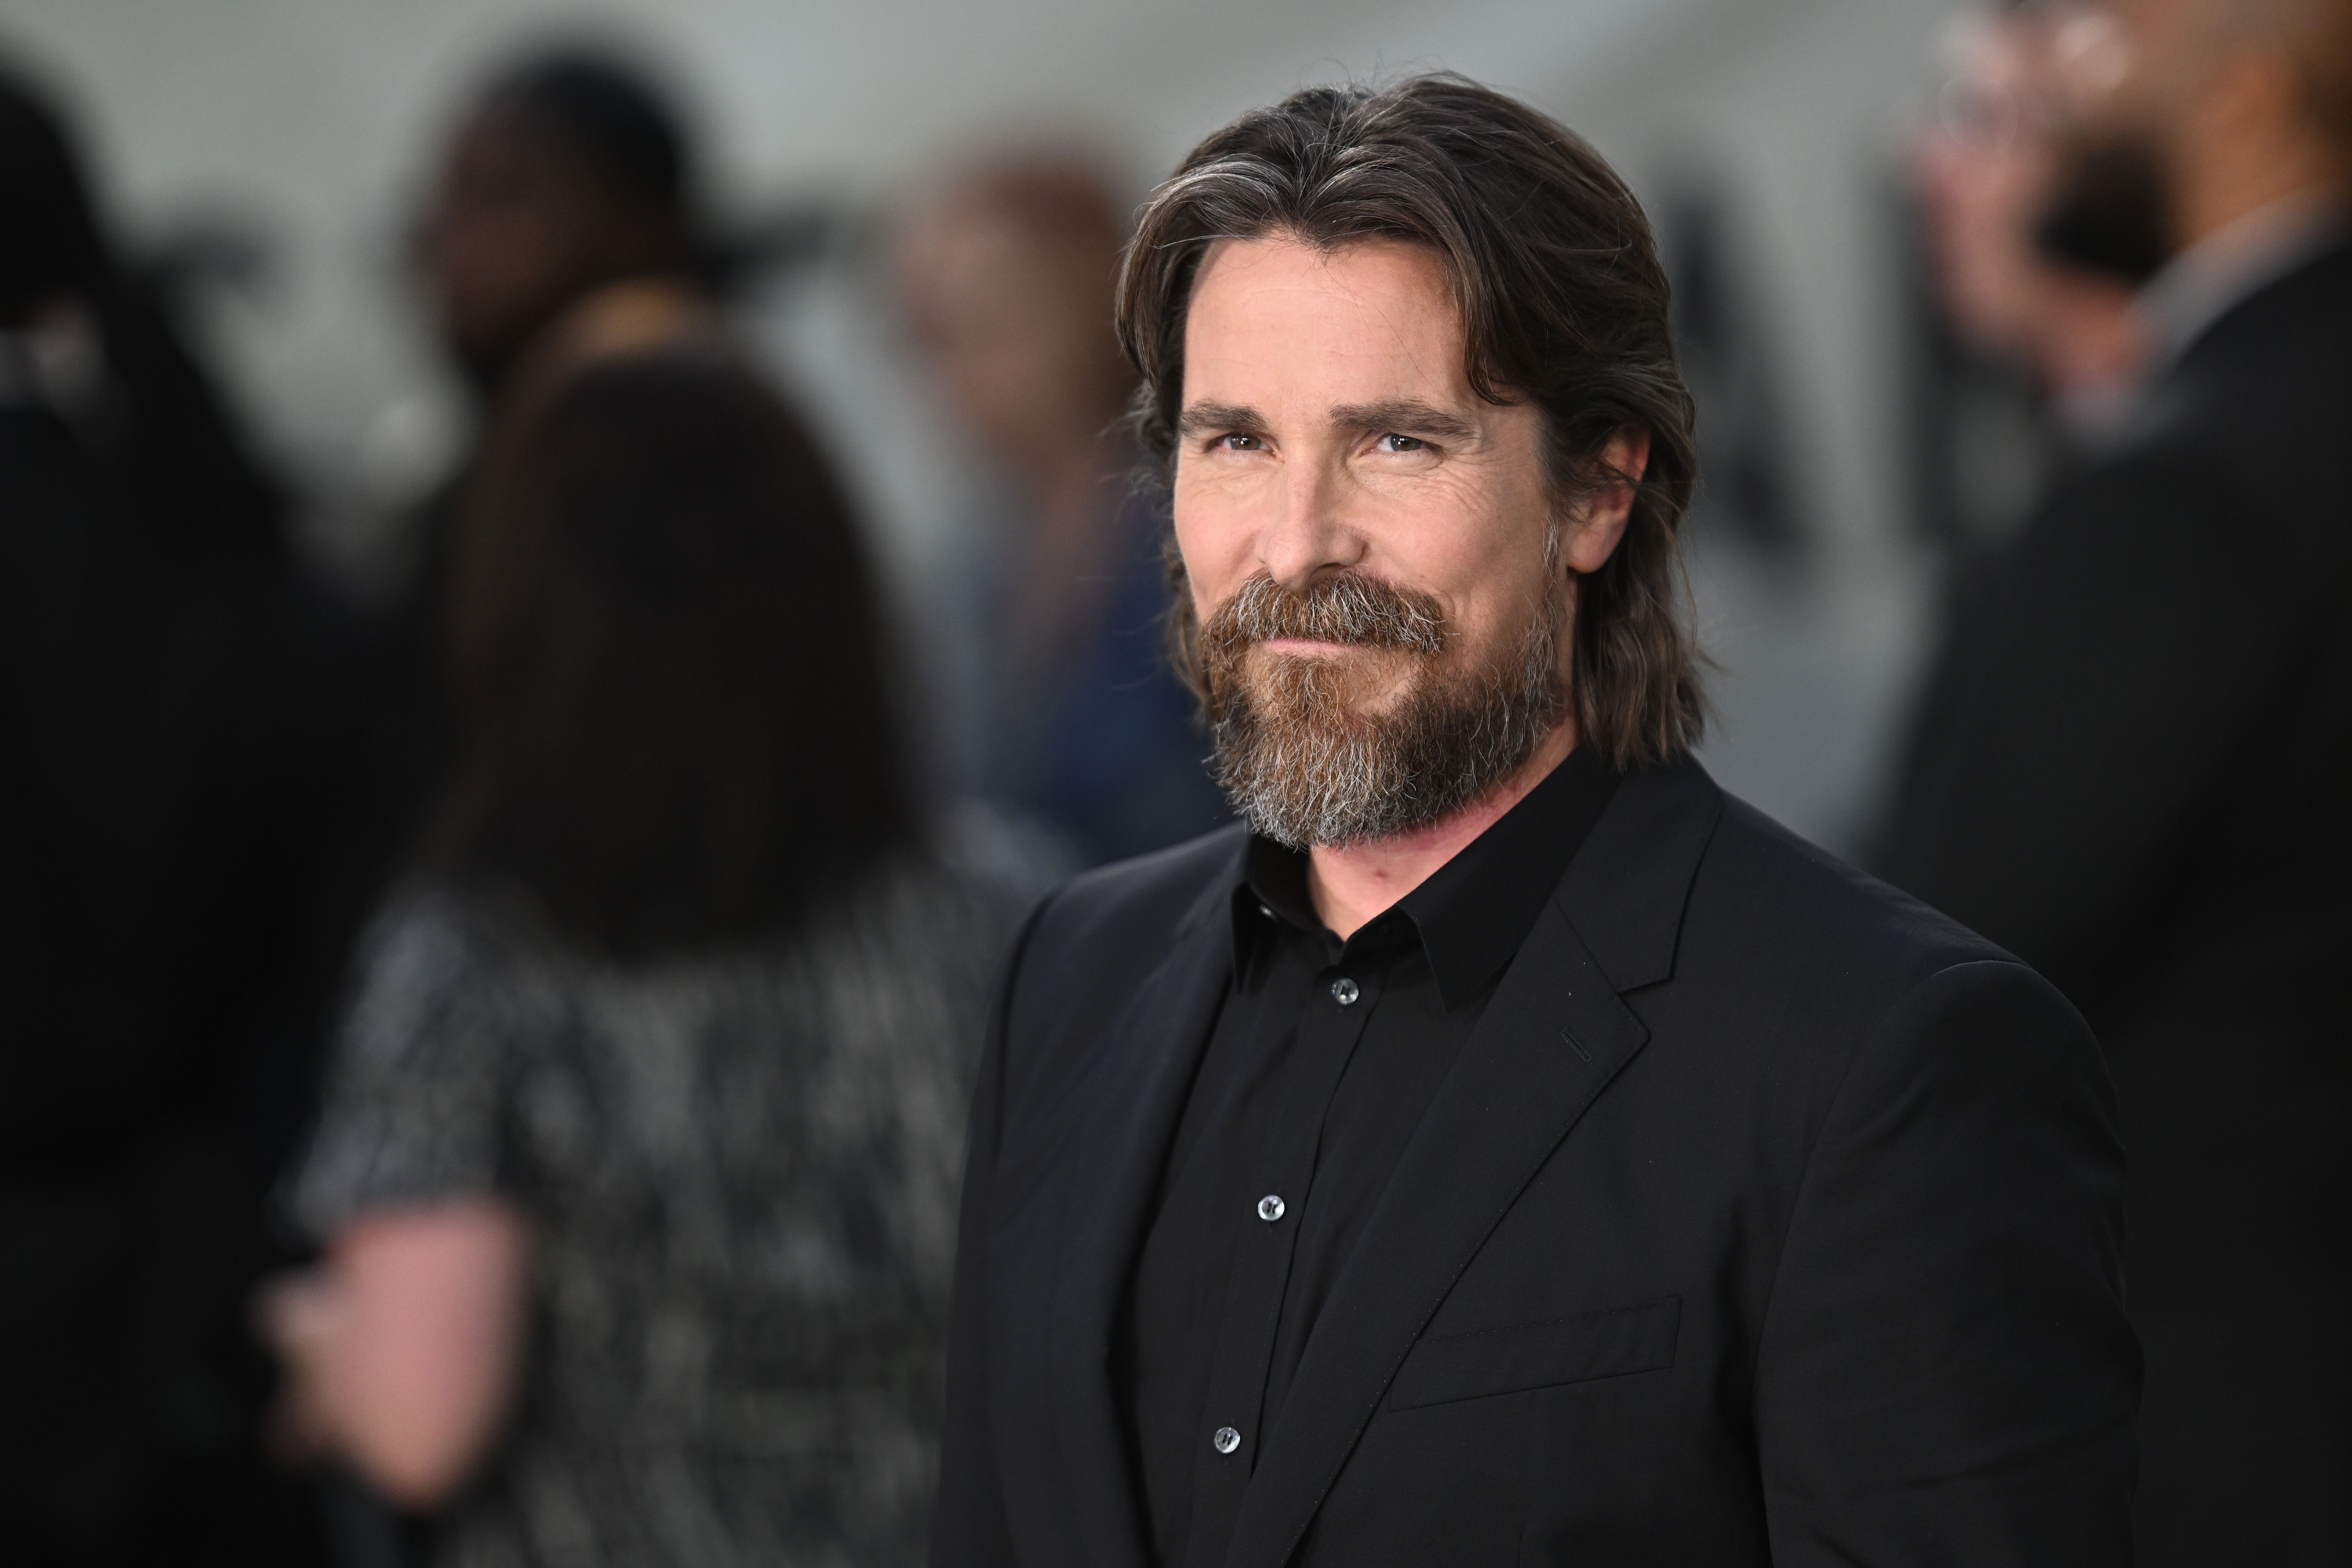 Christian Bale at Odeon Luxe Leicester Square on September 21, 2022 in London, England | Source: Getty Images